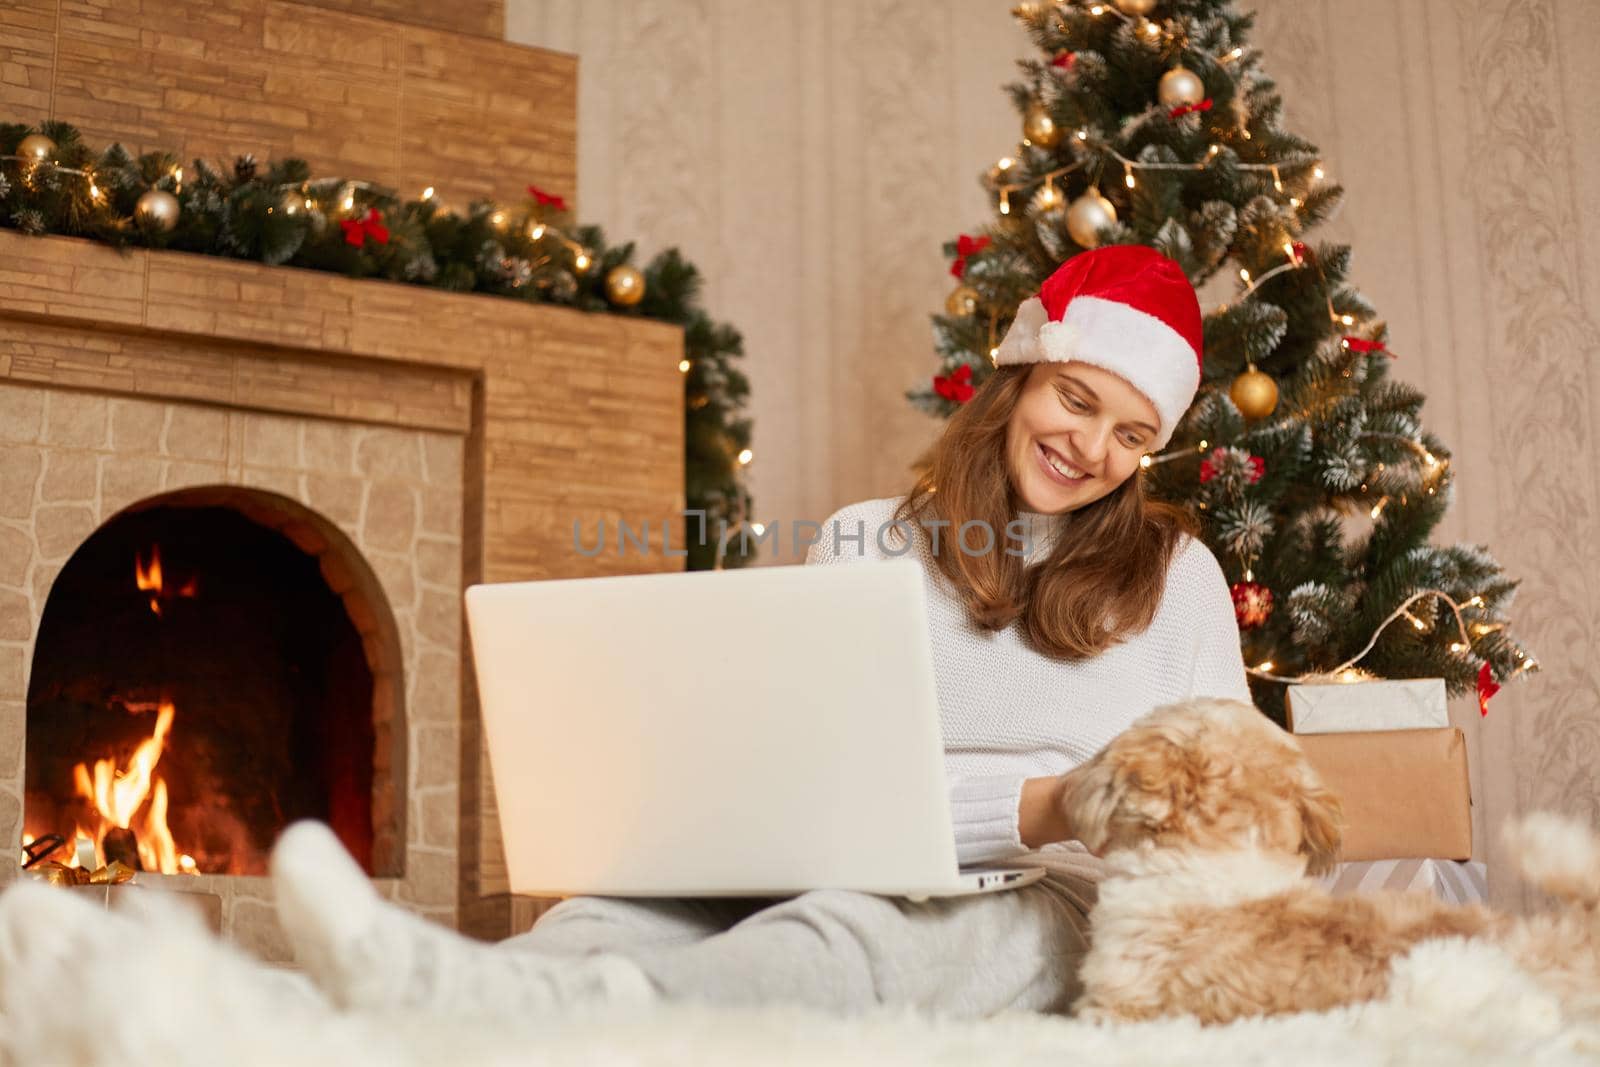 Young happy freelancer working at home while sitting on floor with her pekingese dog, posing in festive room decorated with x-mas lights, sits near fireplace, looks smiling at her pet. by sementsovalesia